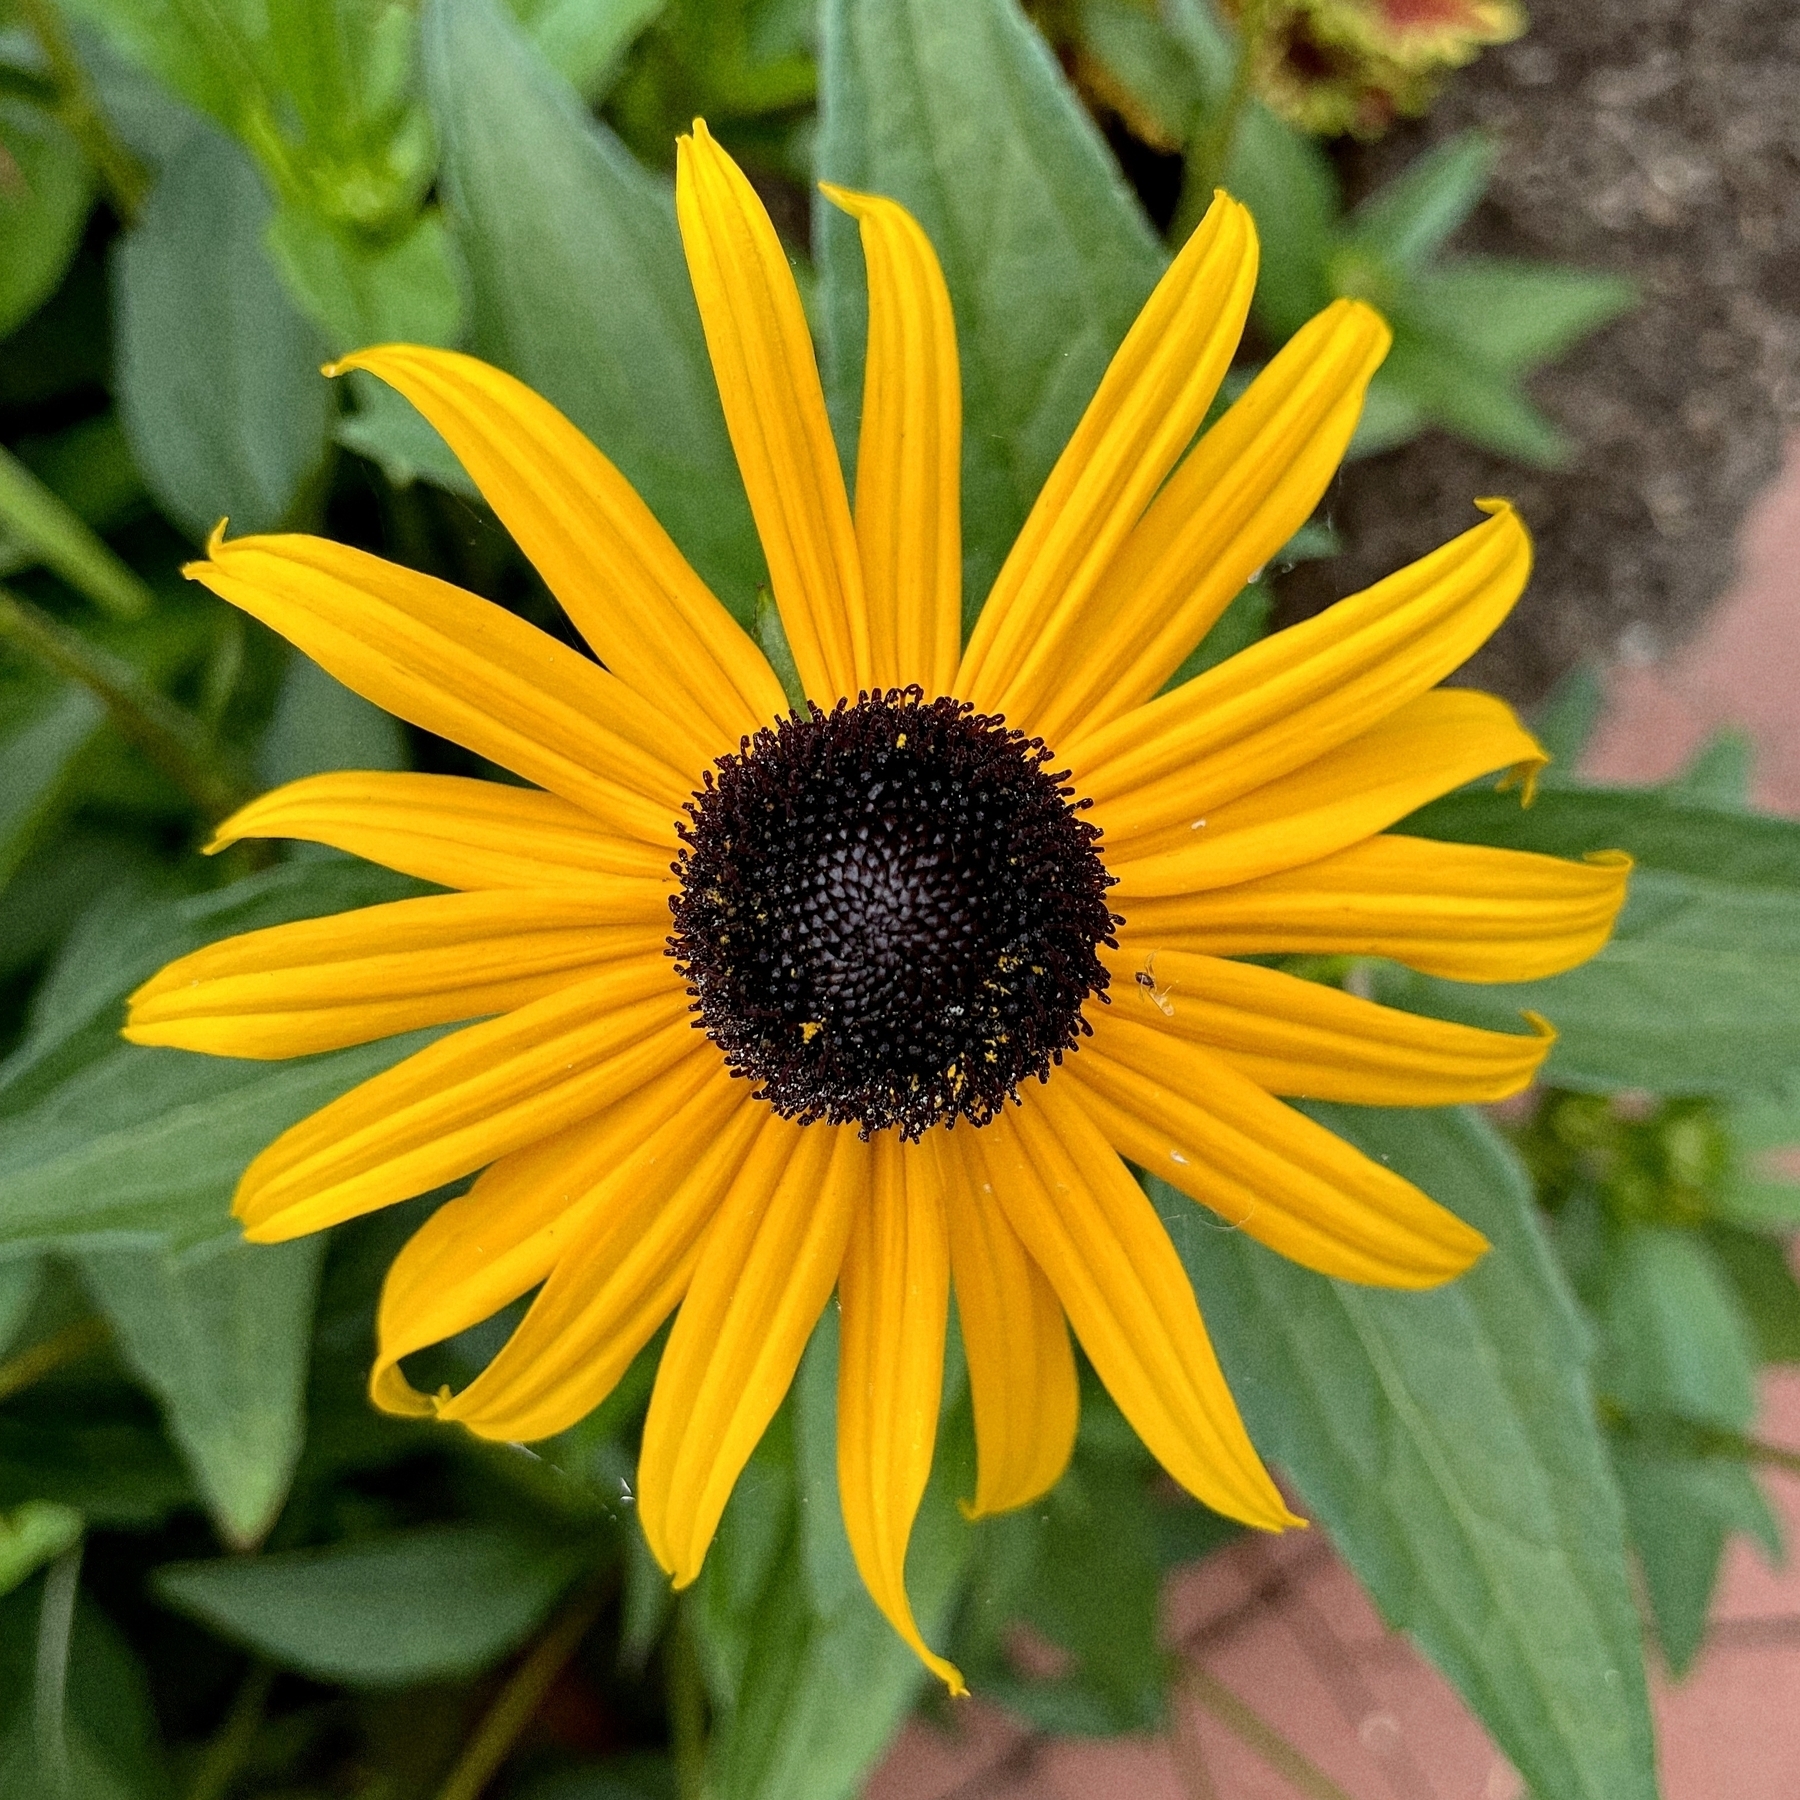 Yellow flower with black center. Greenery and brick walkway in the background. 